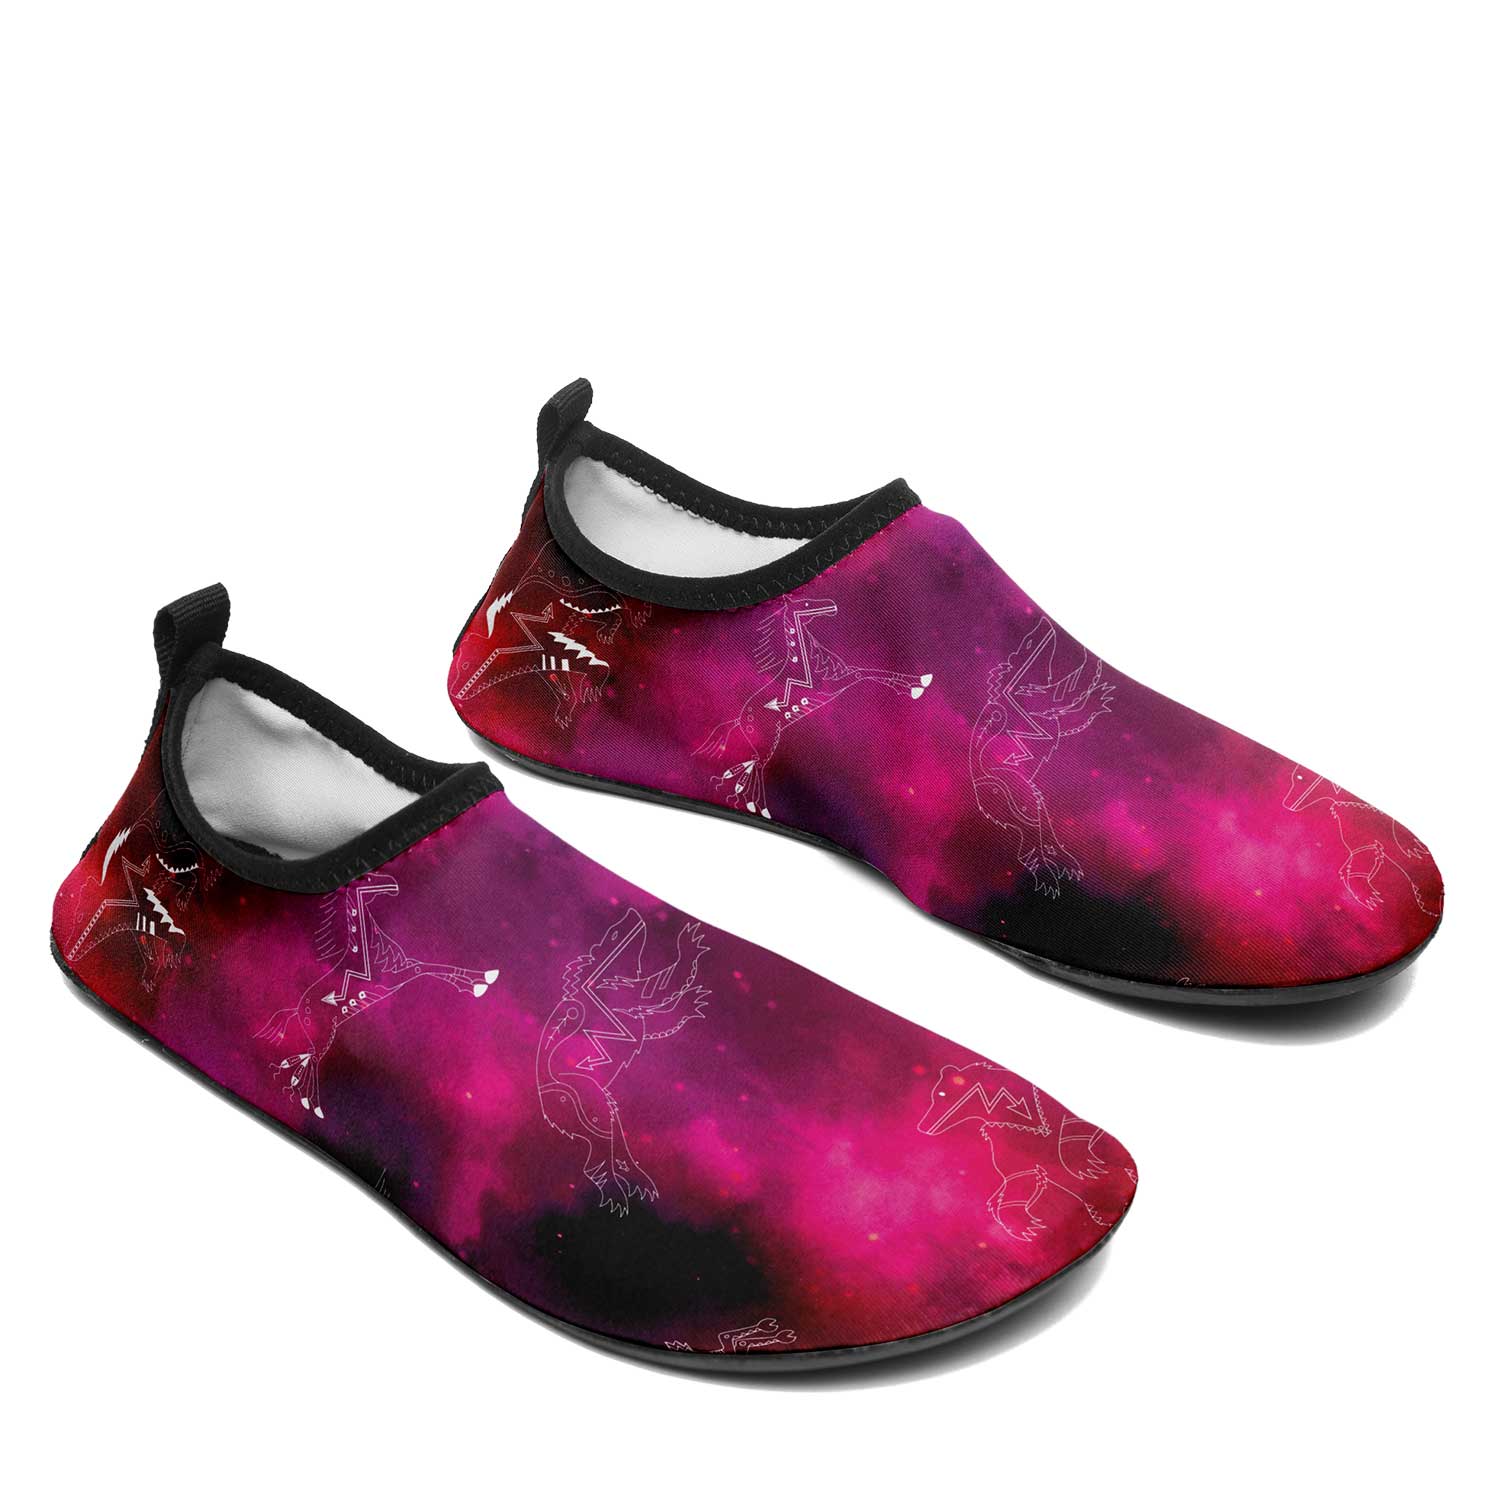 Animal Ancestors 8 Gaseous Clouds Pink and Red Kid's Sockamoccs Slip On Shoes